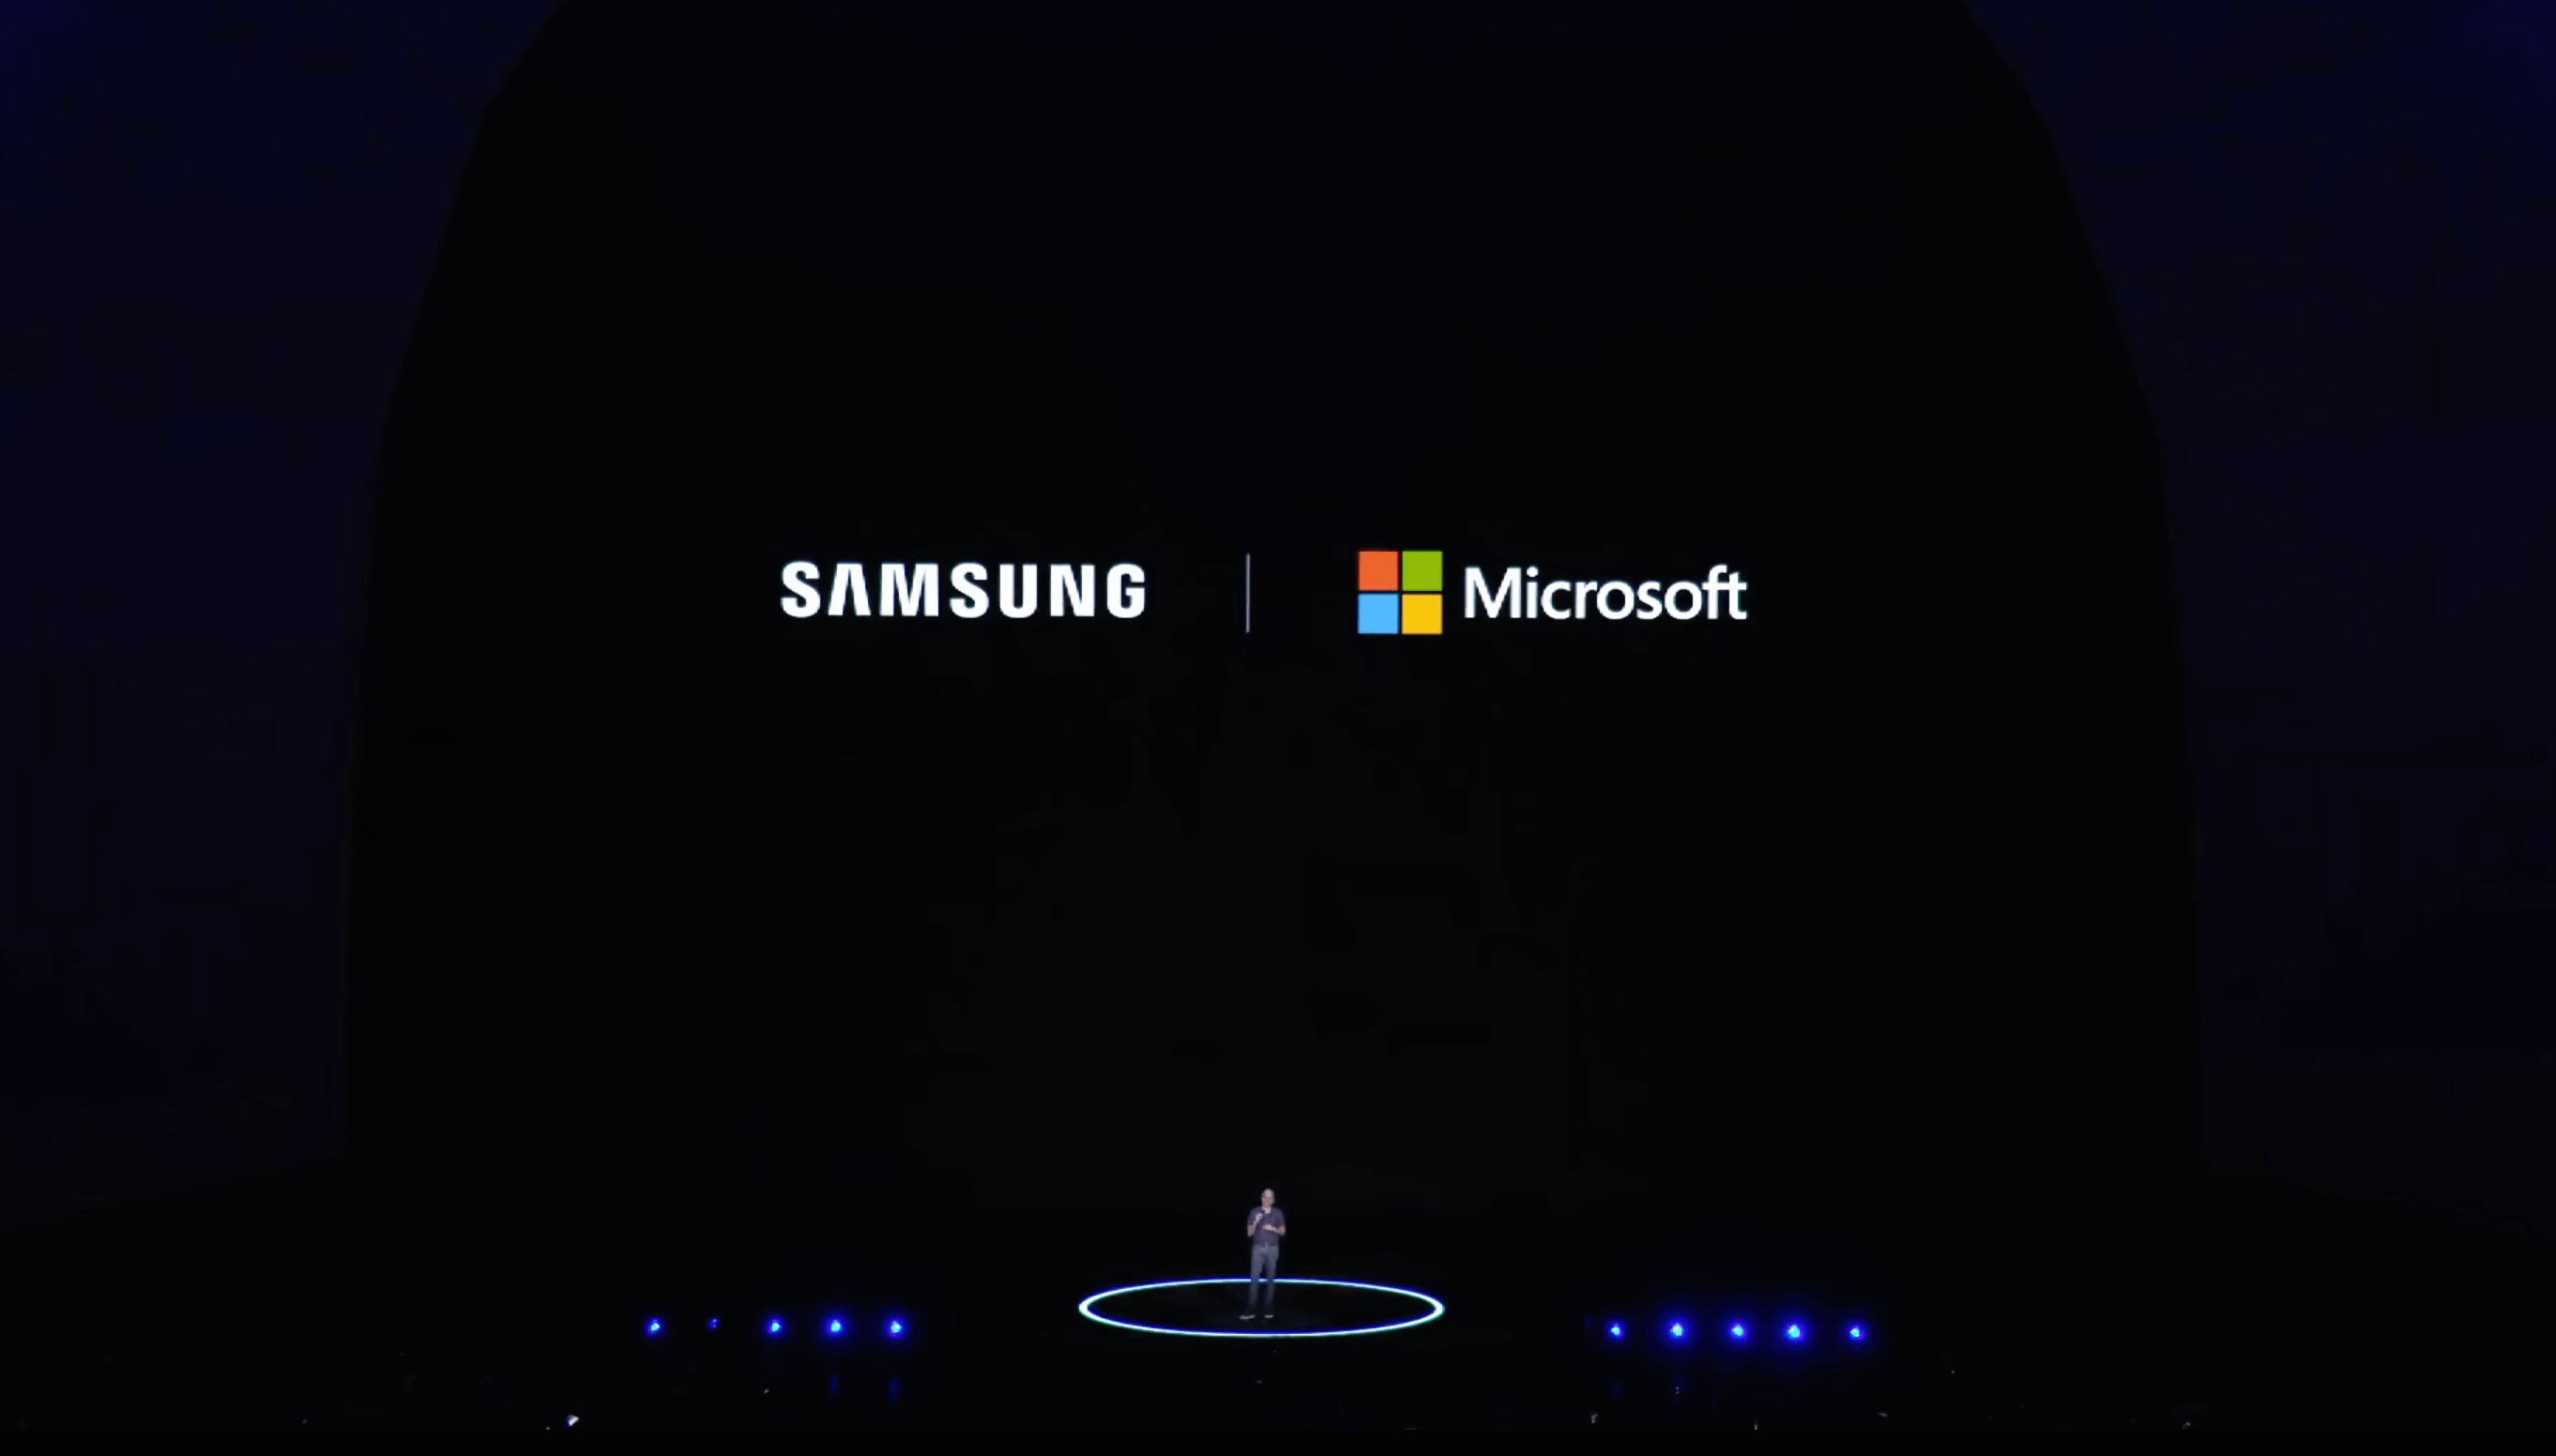 Opinion: Samsung and Microsoft partnership highlights blended device world